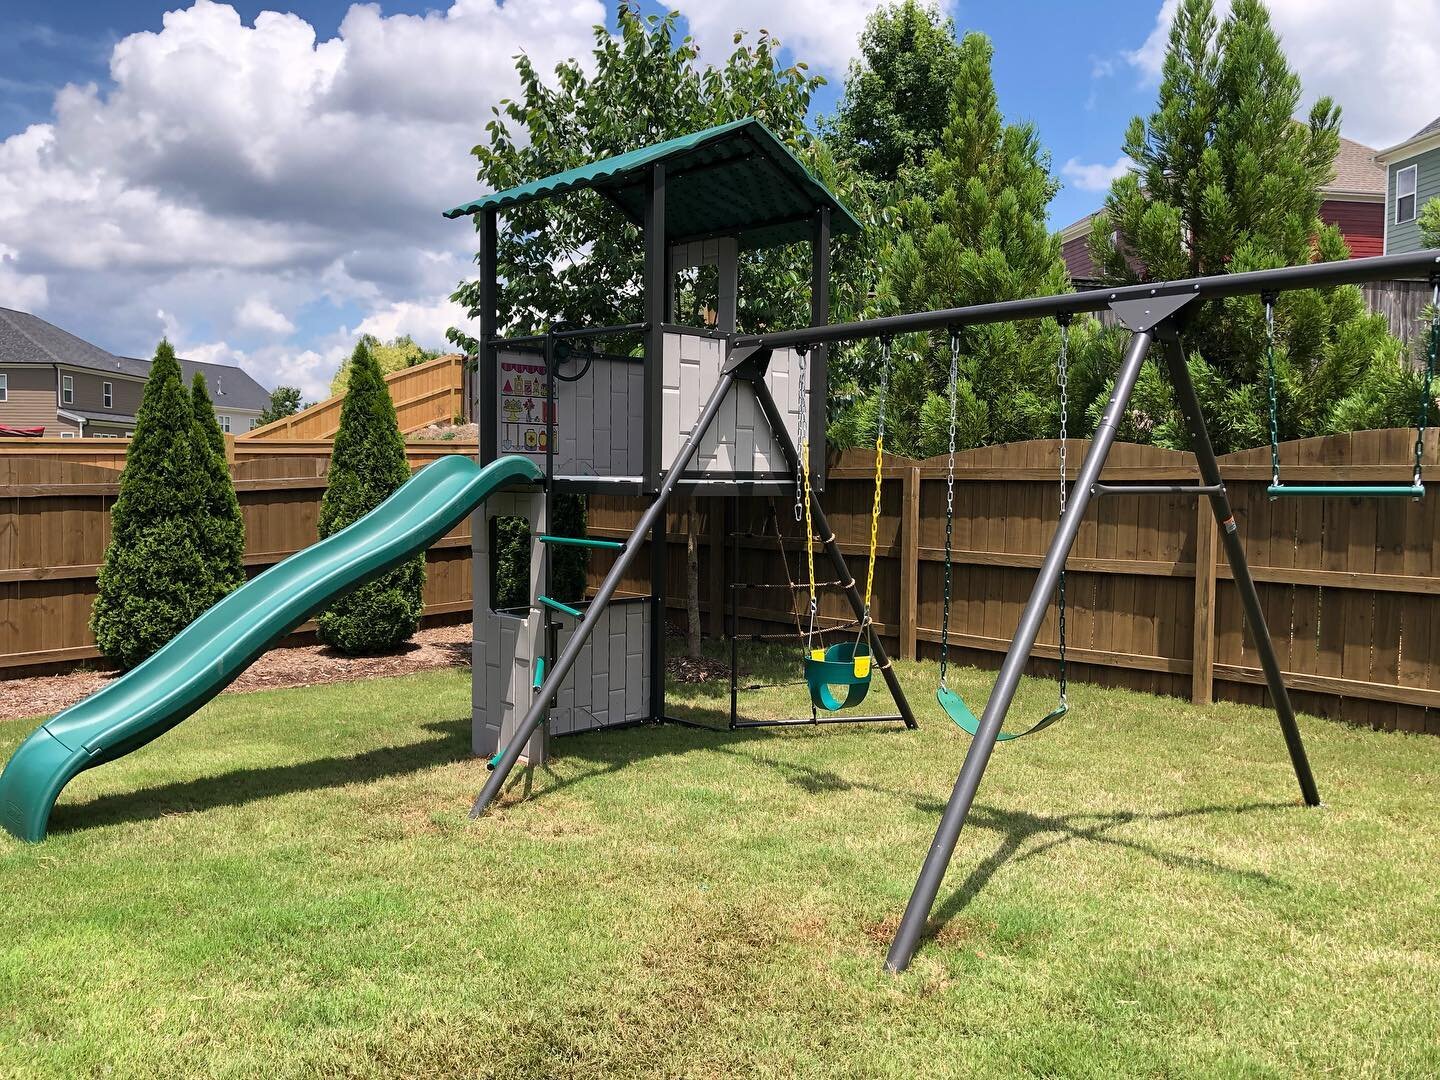 Lots of hot, muggy, sweaty, play set-building action going on. It&rsquo;s been a little soupy outside. 

#strongarmofthelawn #playsetinstallation #swingsetinstallation #playgrounds #playset #swingset #playgroundinstallation #theswingsetproject #plays